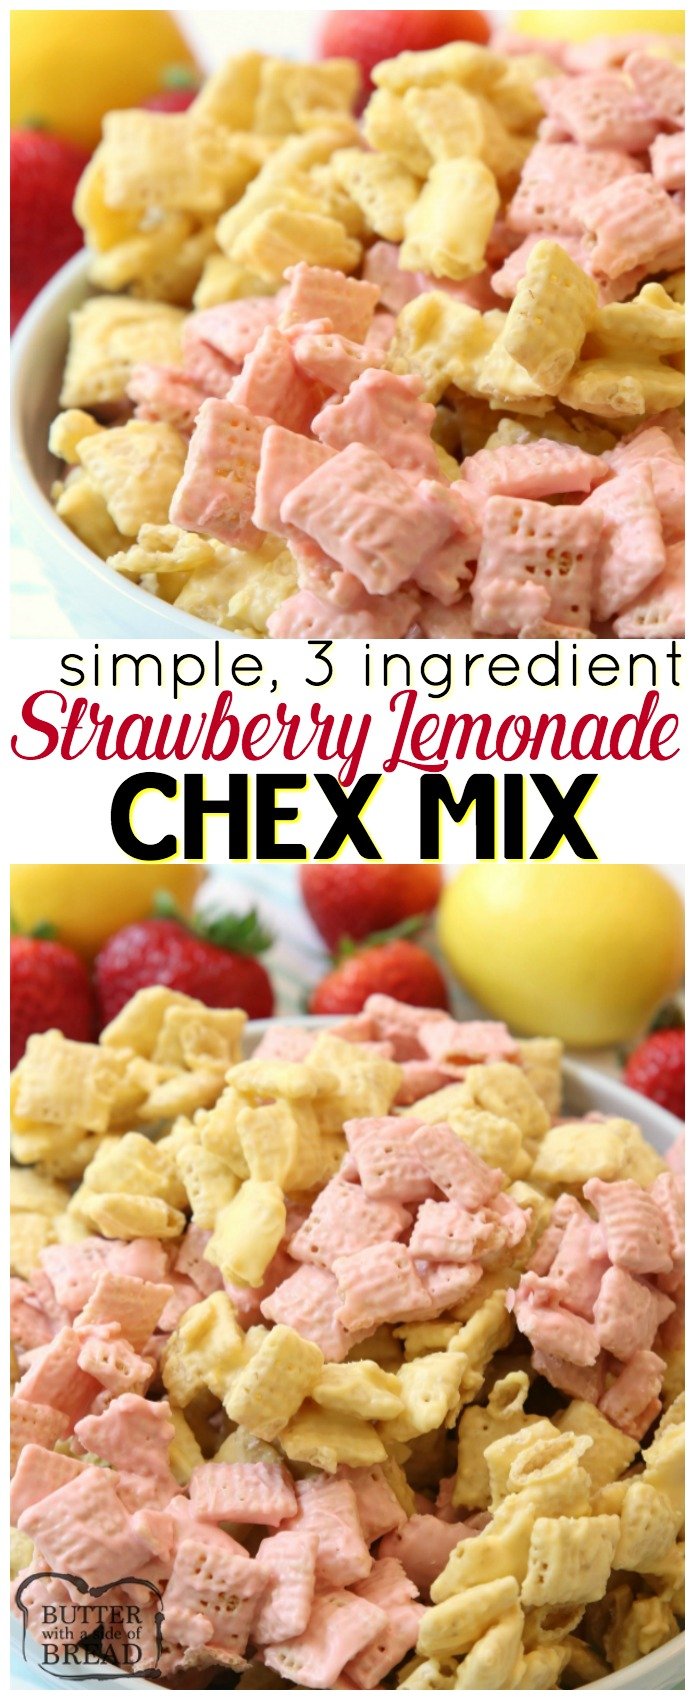 Strawberry Lemonade Chex Mix made easy in under 10 minutes with just 3 ingredients! Great flavor and everyone loves munching on this fun Chex Mix. Simple Chex mix recipe with strawberry lemon flavors perfect for any day that needs a little more fun! #chex #chexmix #strawberry #lemonade #dessert #candy #candymelts #recipe from Butter With A Side of Bread